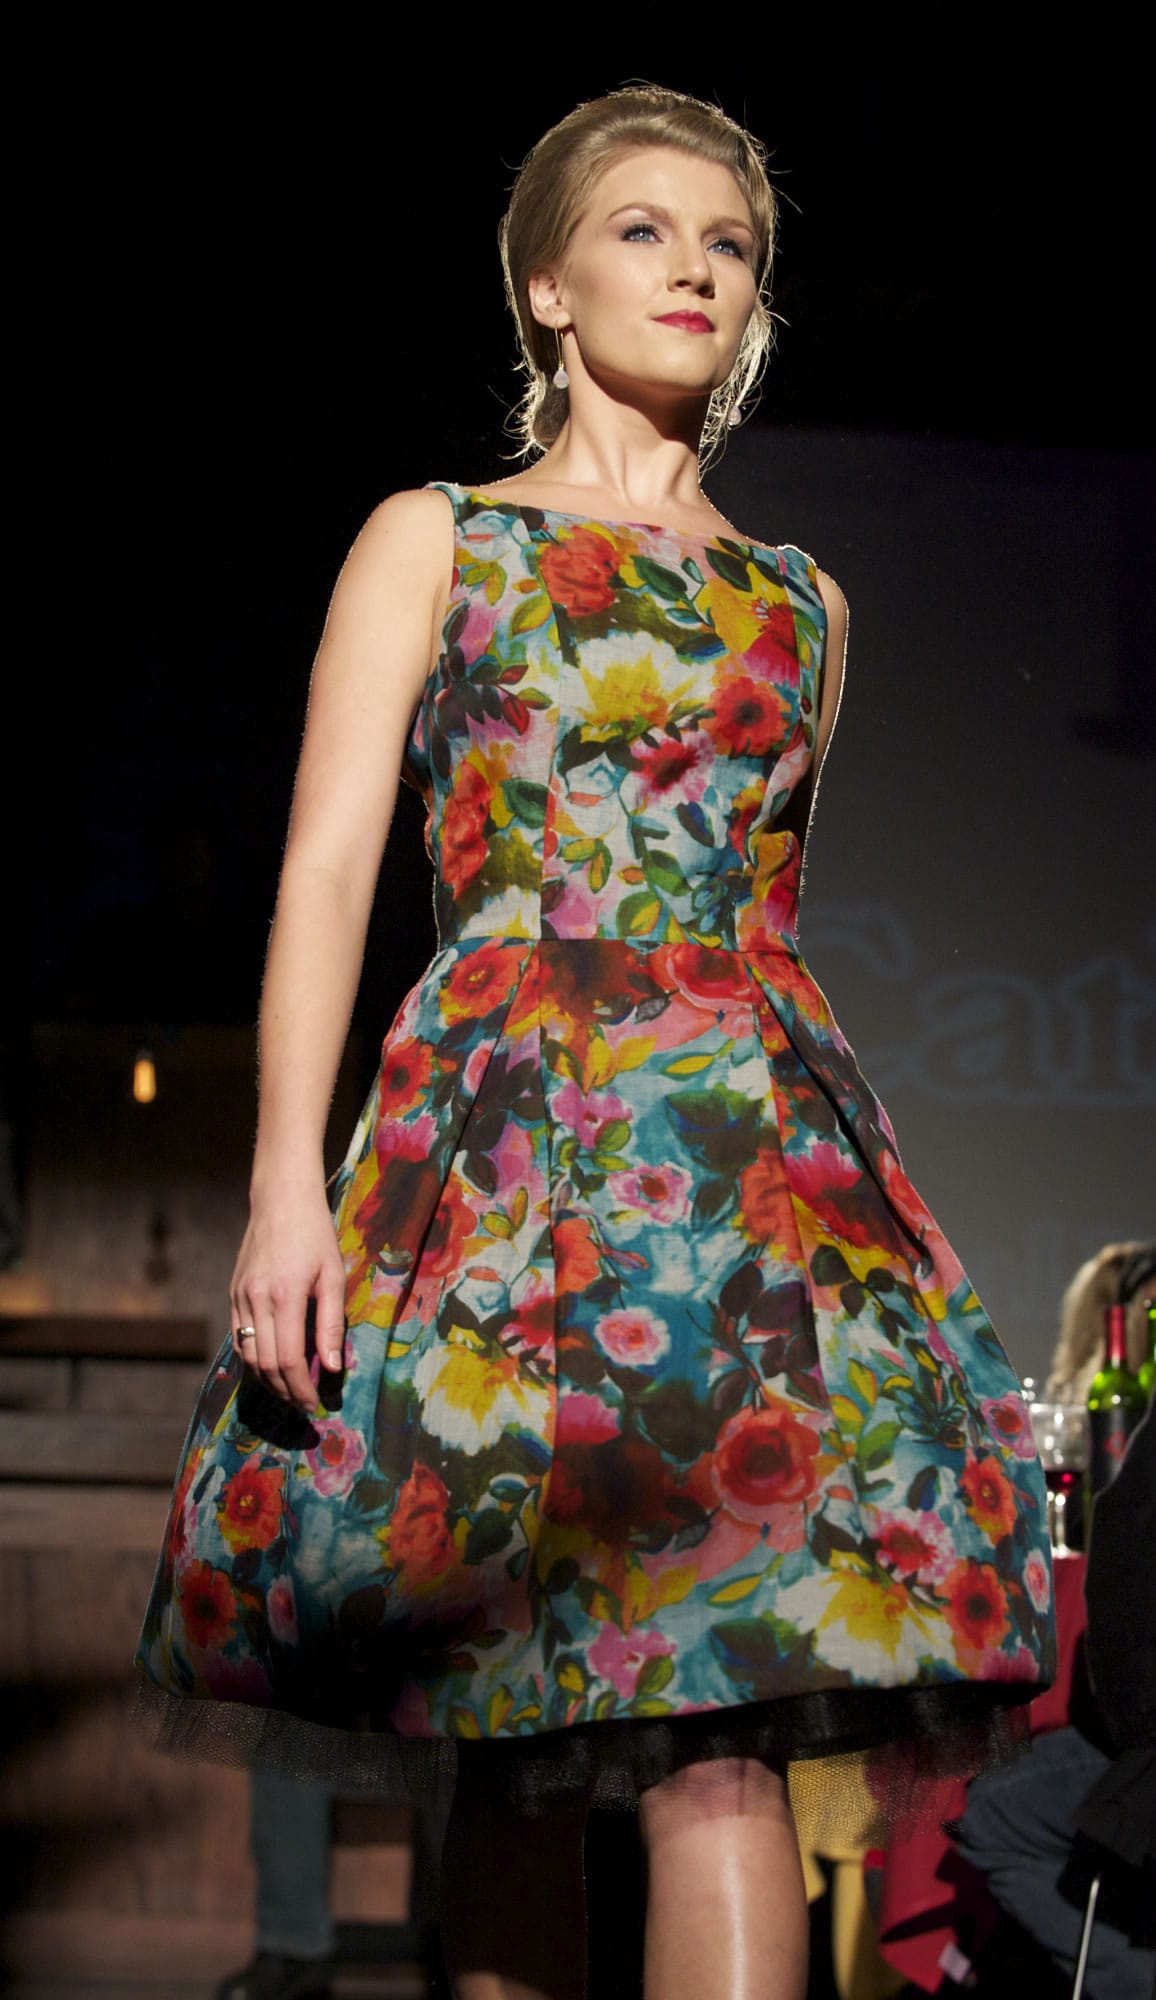 A classic example of the dresses designed by Cathy Rae Kudla, this dress debuted at the fall Couve Couture fashion show in 2012.